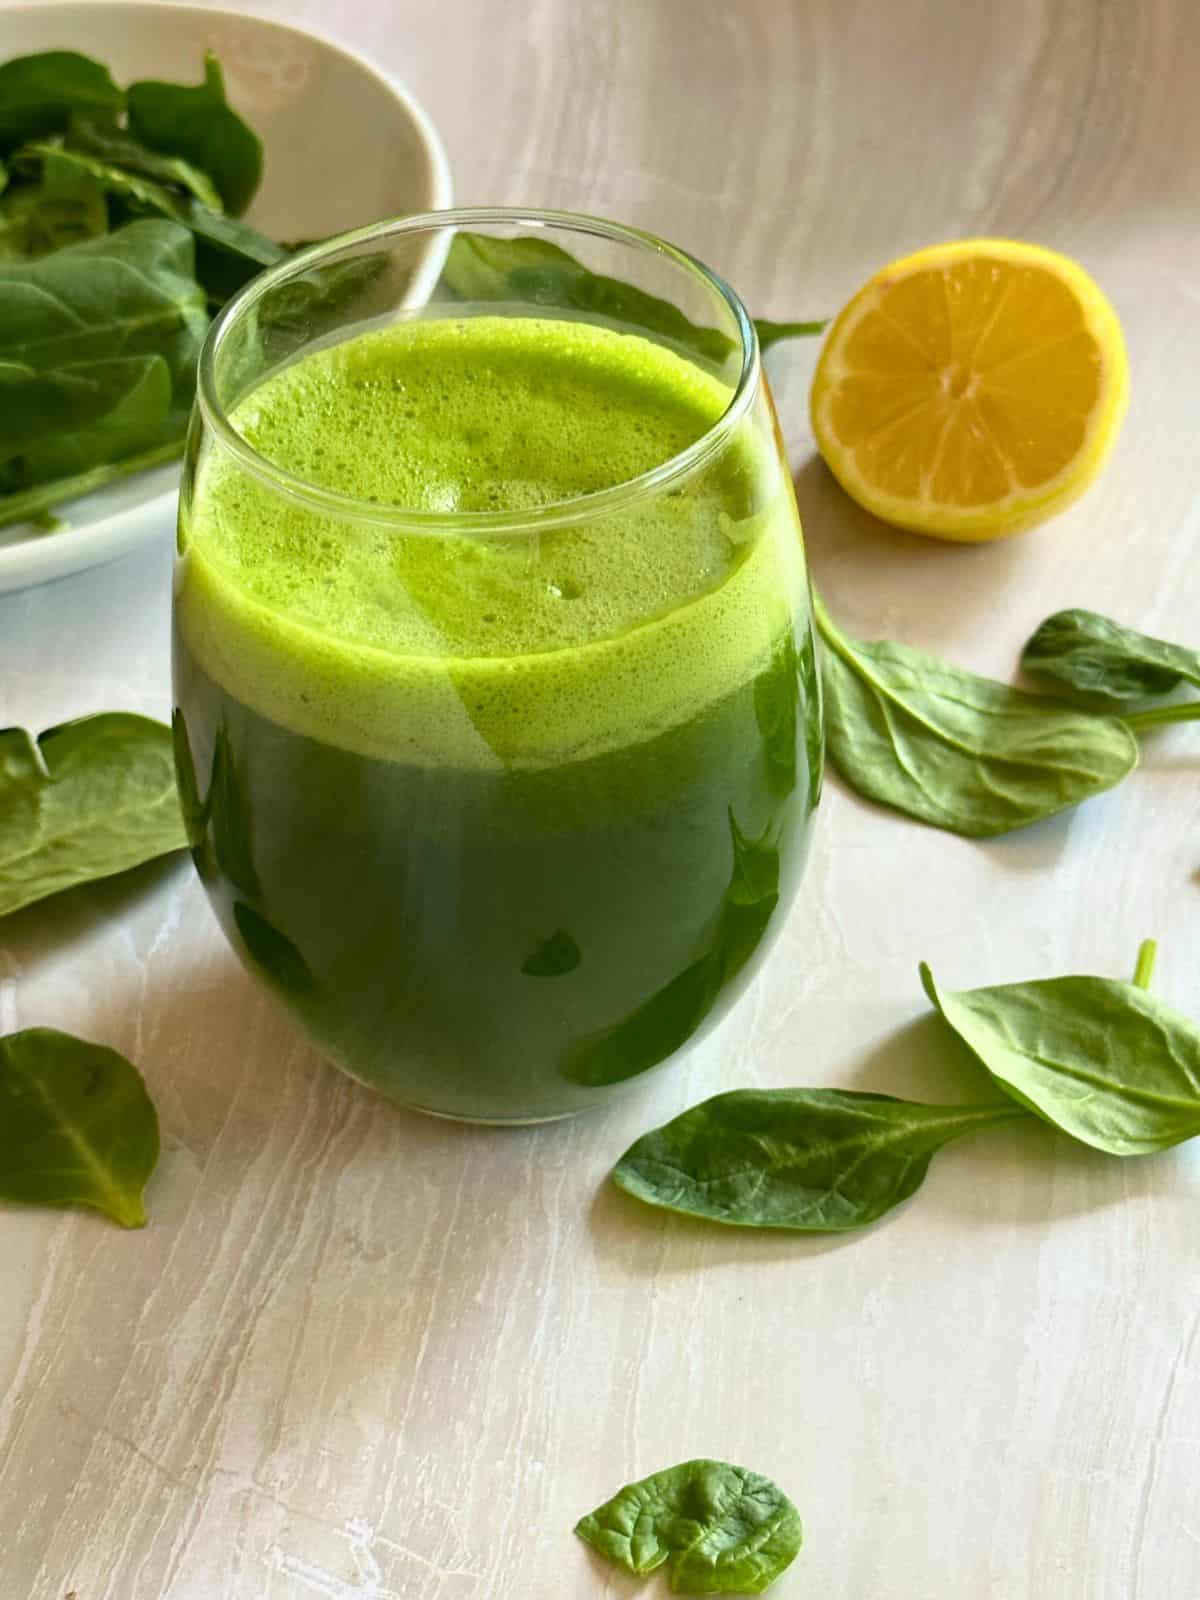 spinach juice recipe fresh and homemade in a glass